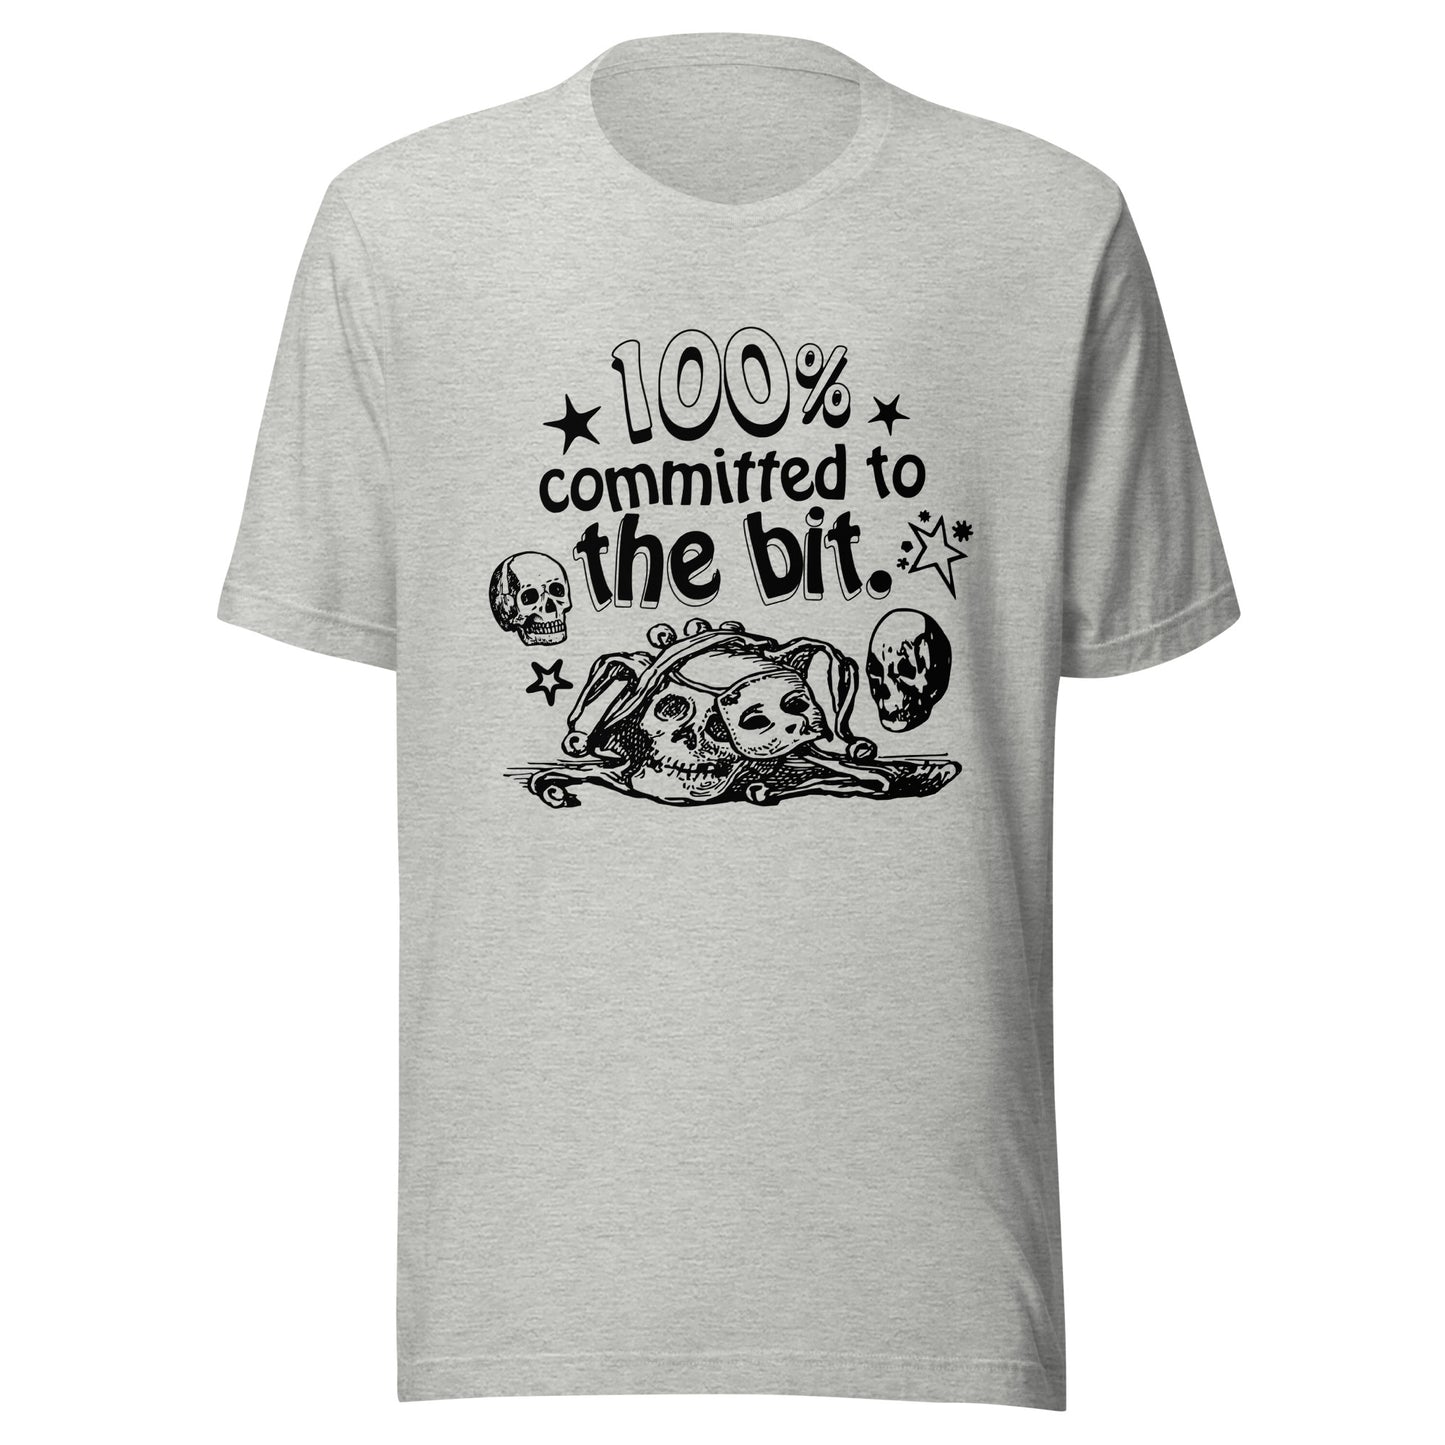 "Committed To The Bit" Unisex t-shirt